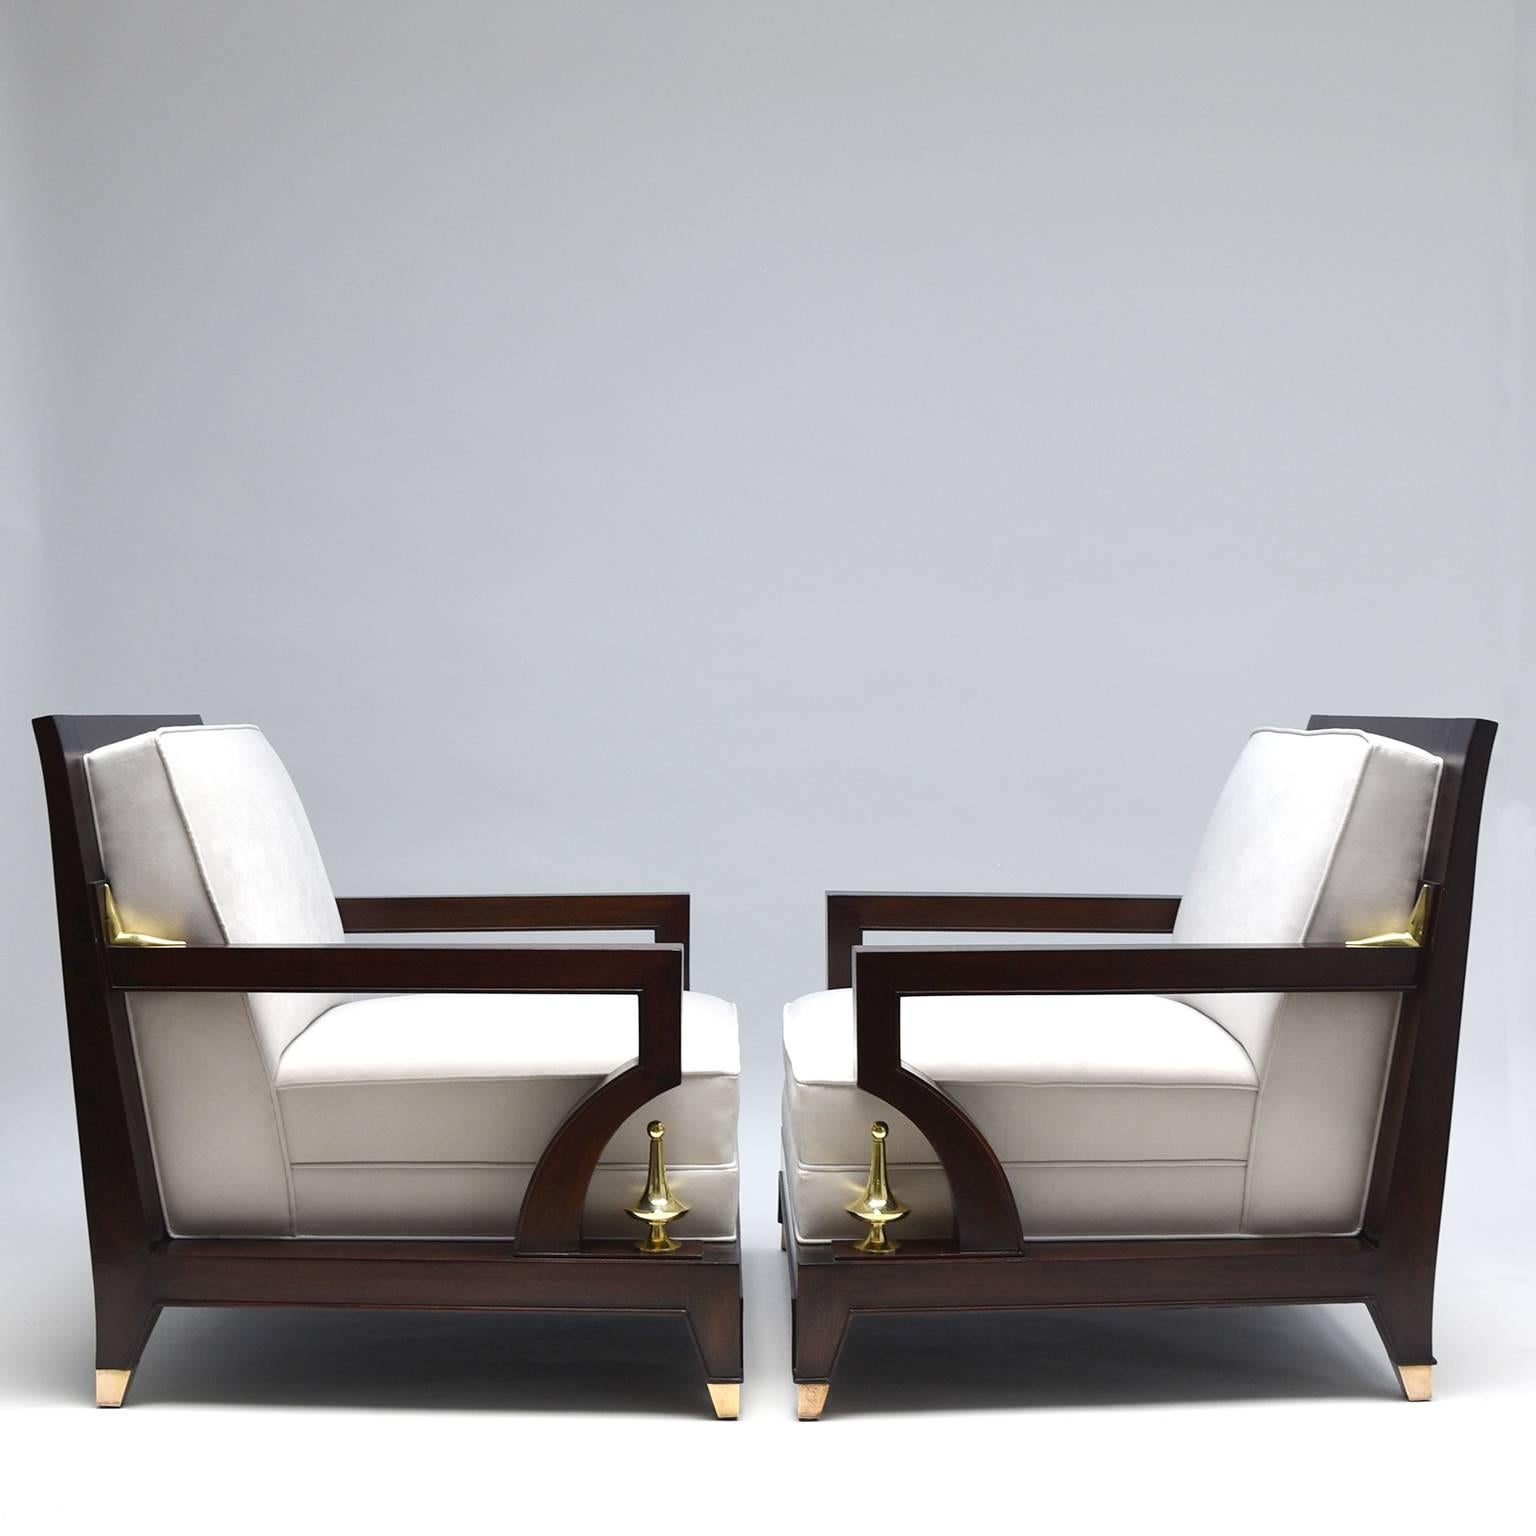 Great and extraordinary club chairs designed by Octavio Vidales. Manufactured in mahogany wood and upholstered in white.